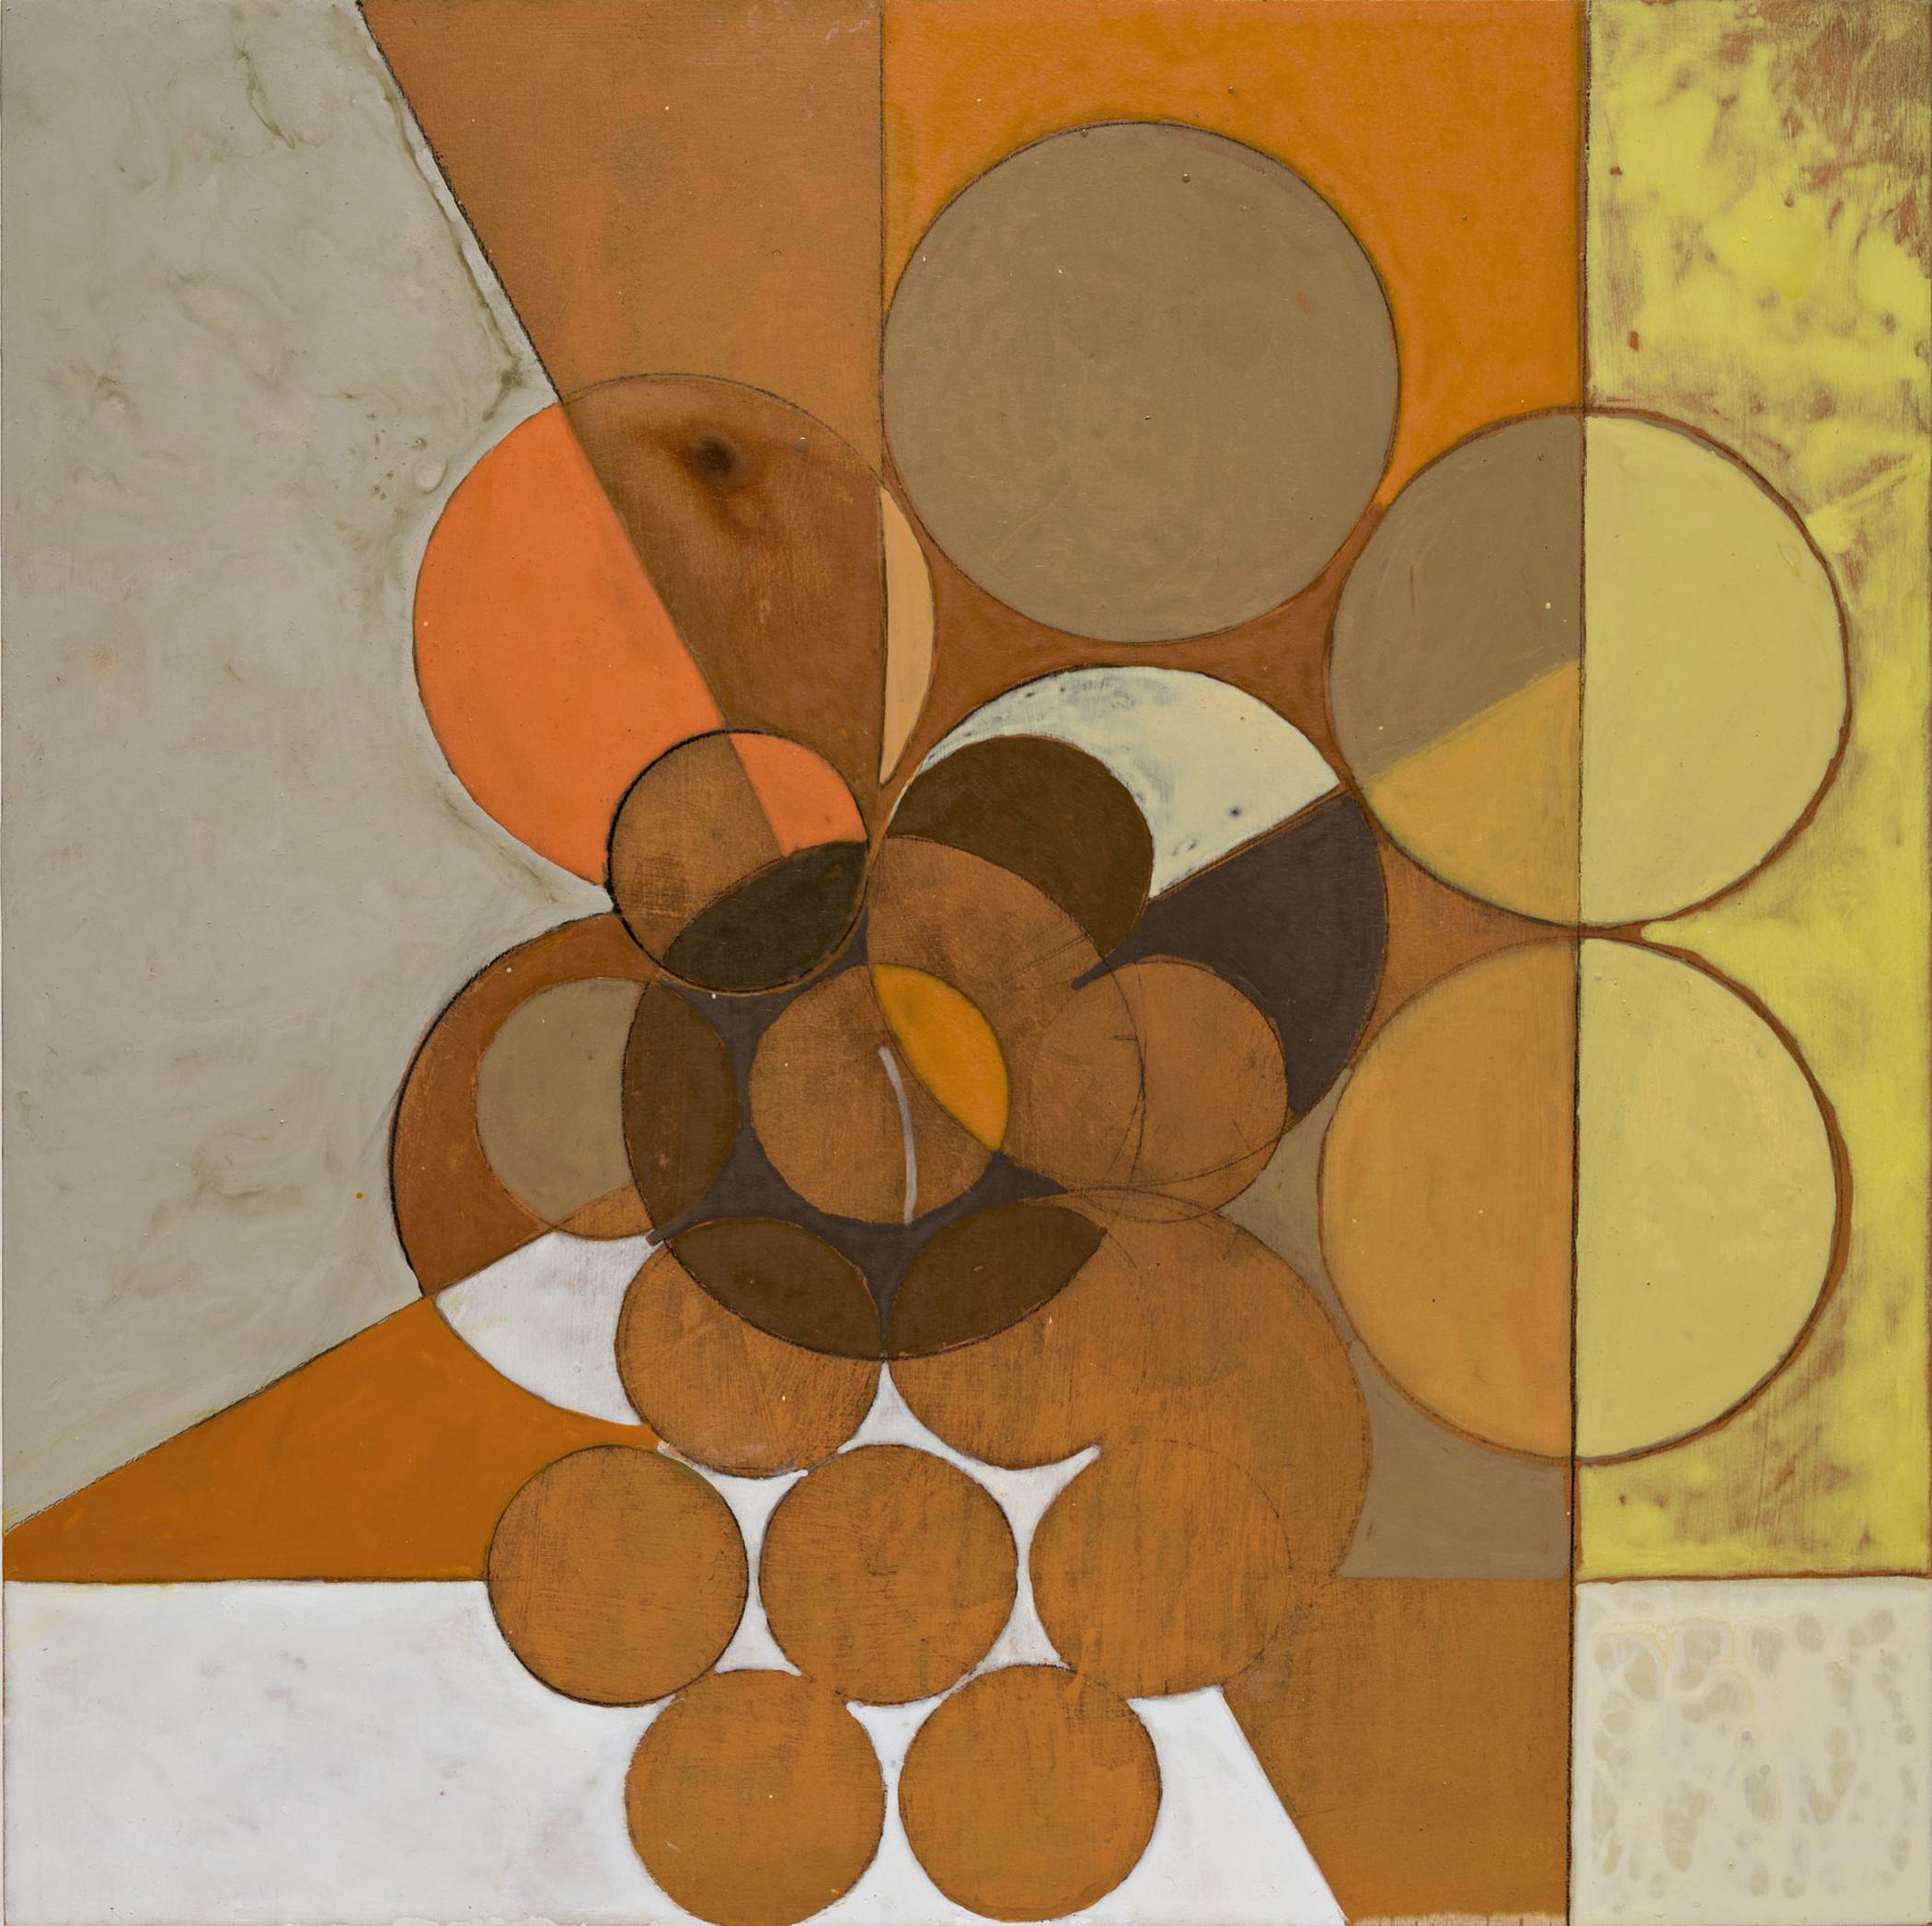 Goddess Paintings (Set of 4 Abstract Geometric Orange Paintings on Panel) - Beige Abstract Painting by Jeanette Fintz